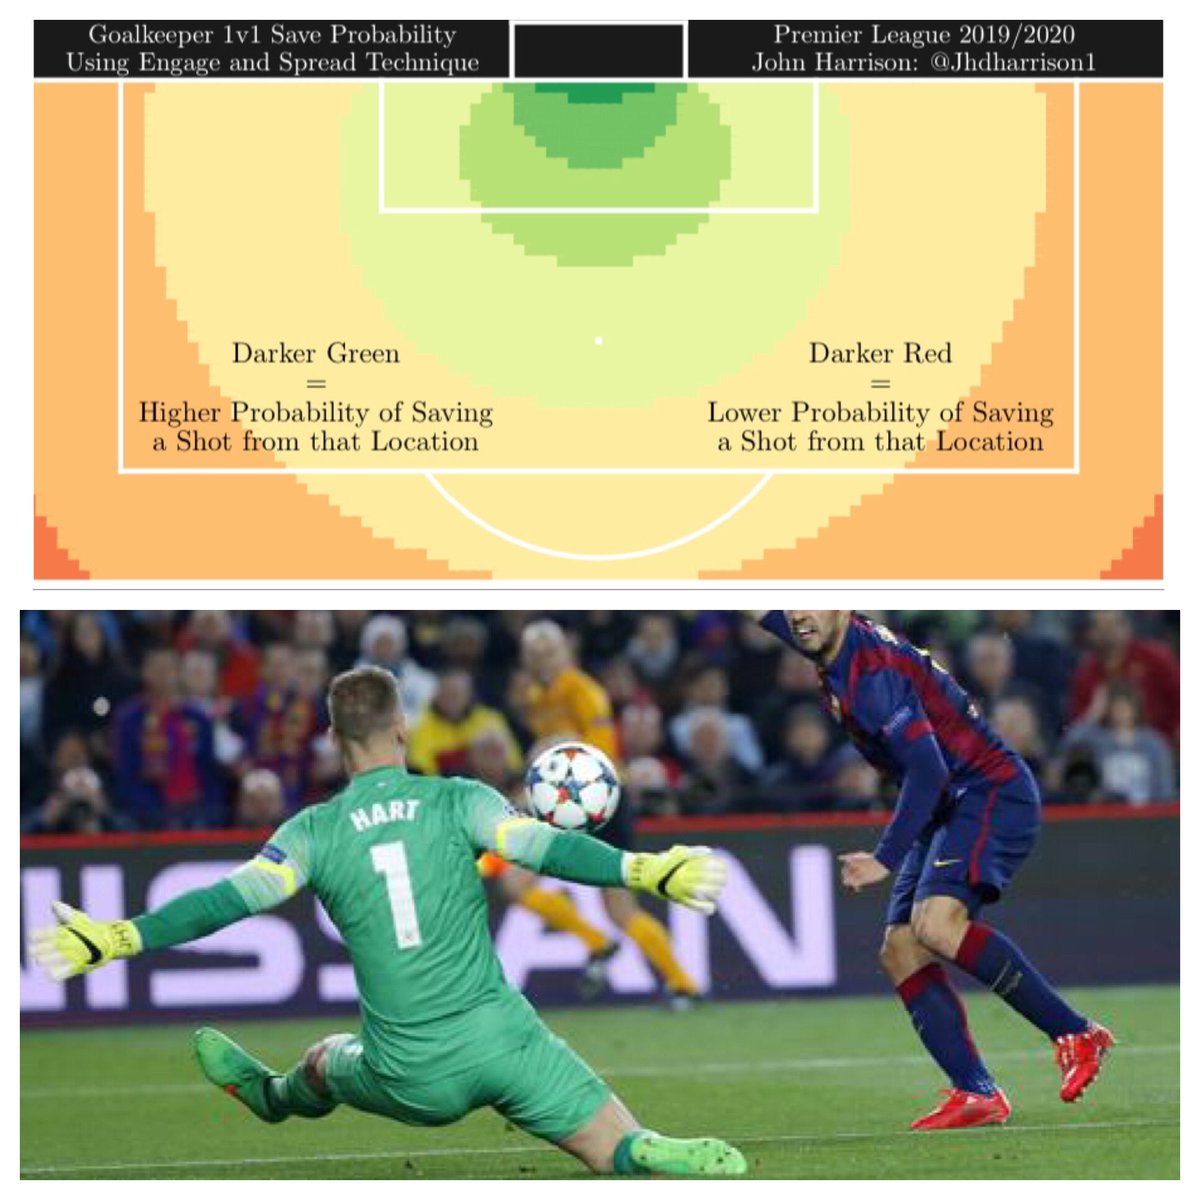 I analysed 800+ 1v1s in the  #PremierLeague last year & using a logistic regression model found that the engage & react strategy that  #Guiata regularly employs gives a GK a far lower chance of making the save vs the engage & block & the engage & spread premediated strategies.